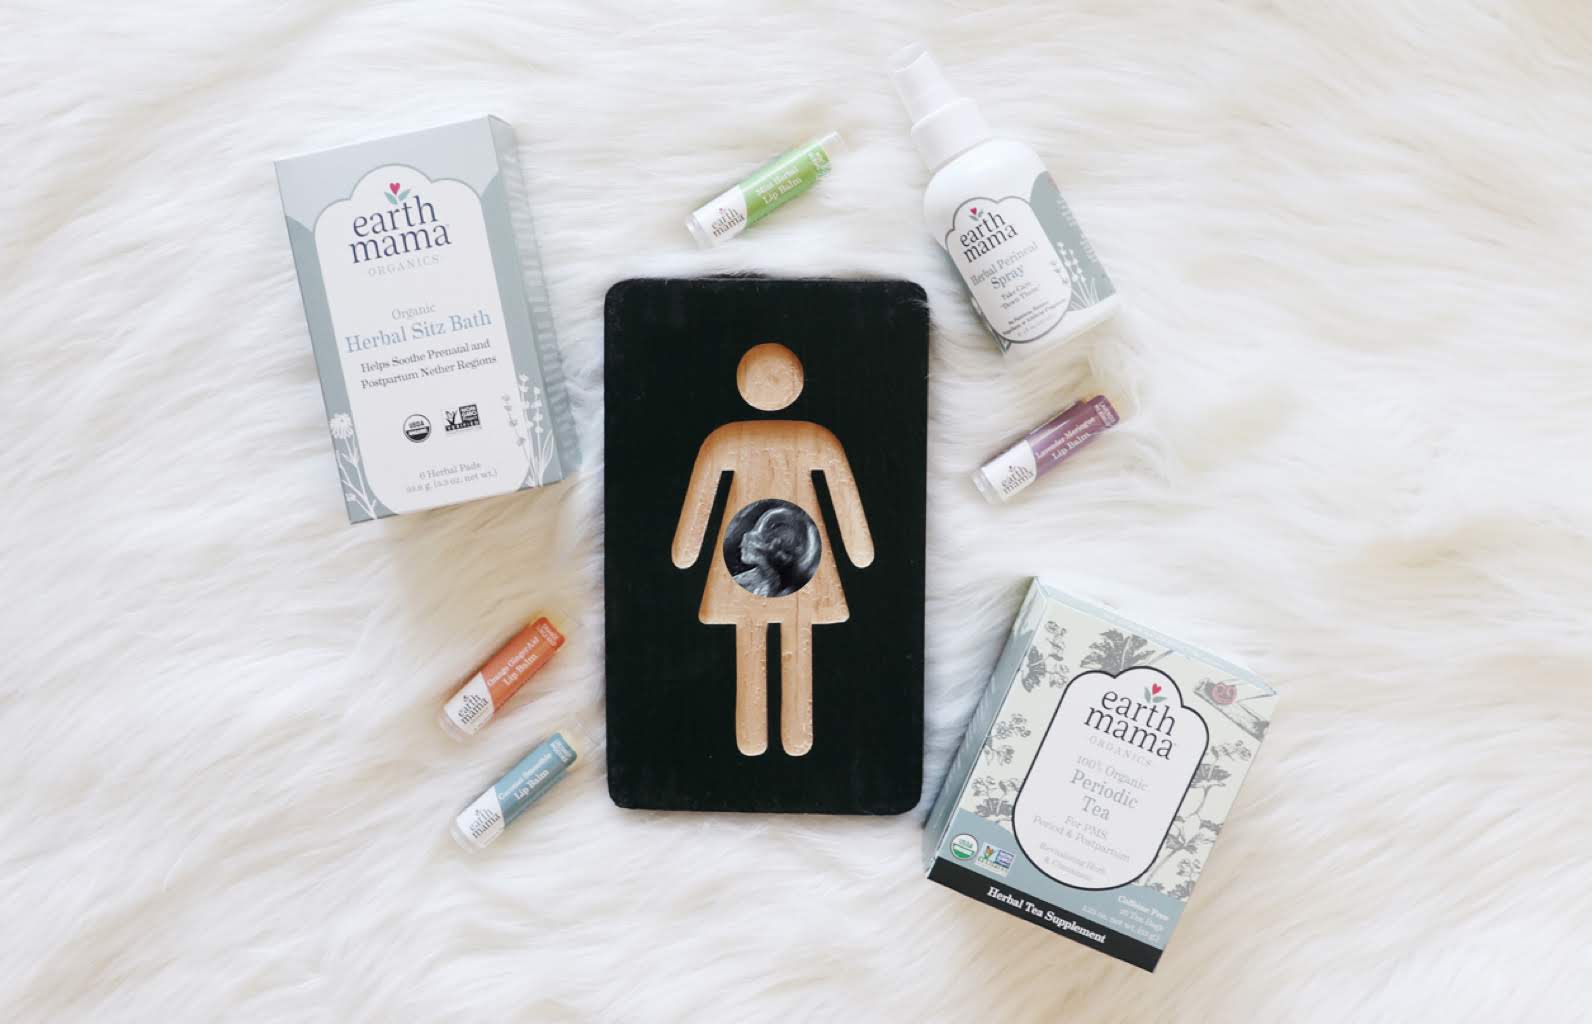 Trying to figure out what you need after baby? Florida Motherhood blogger, Oh Happy Play, shares 5 Postpartum Must-Have Products For Mom!